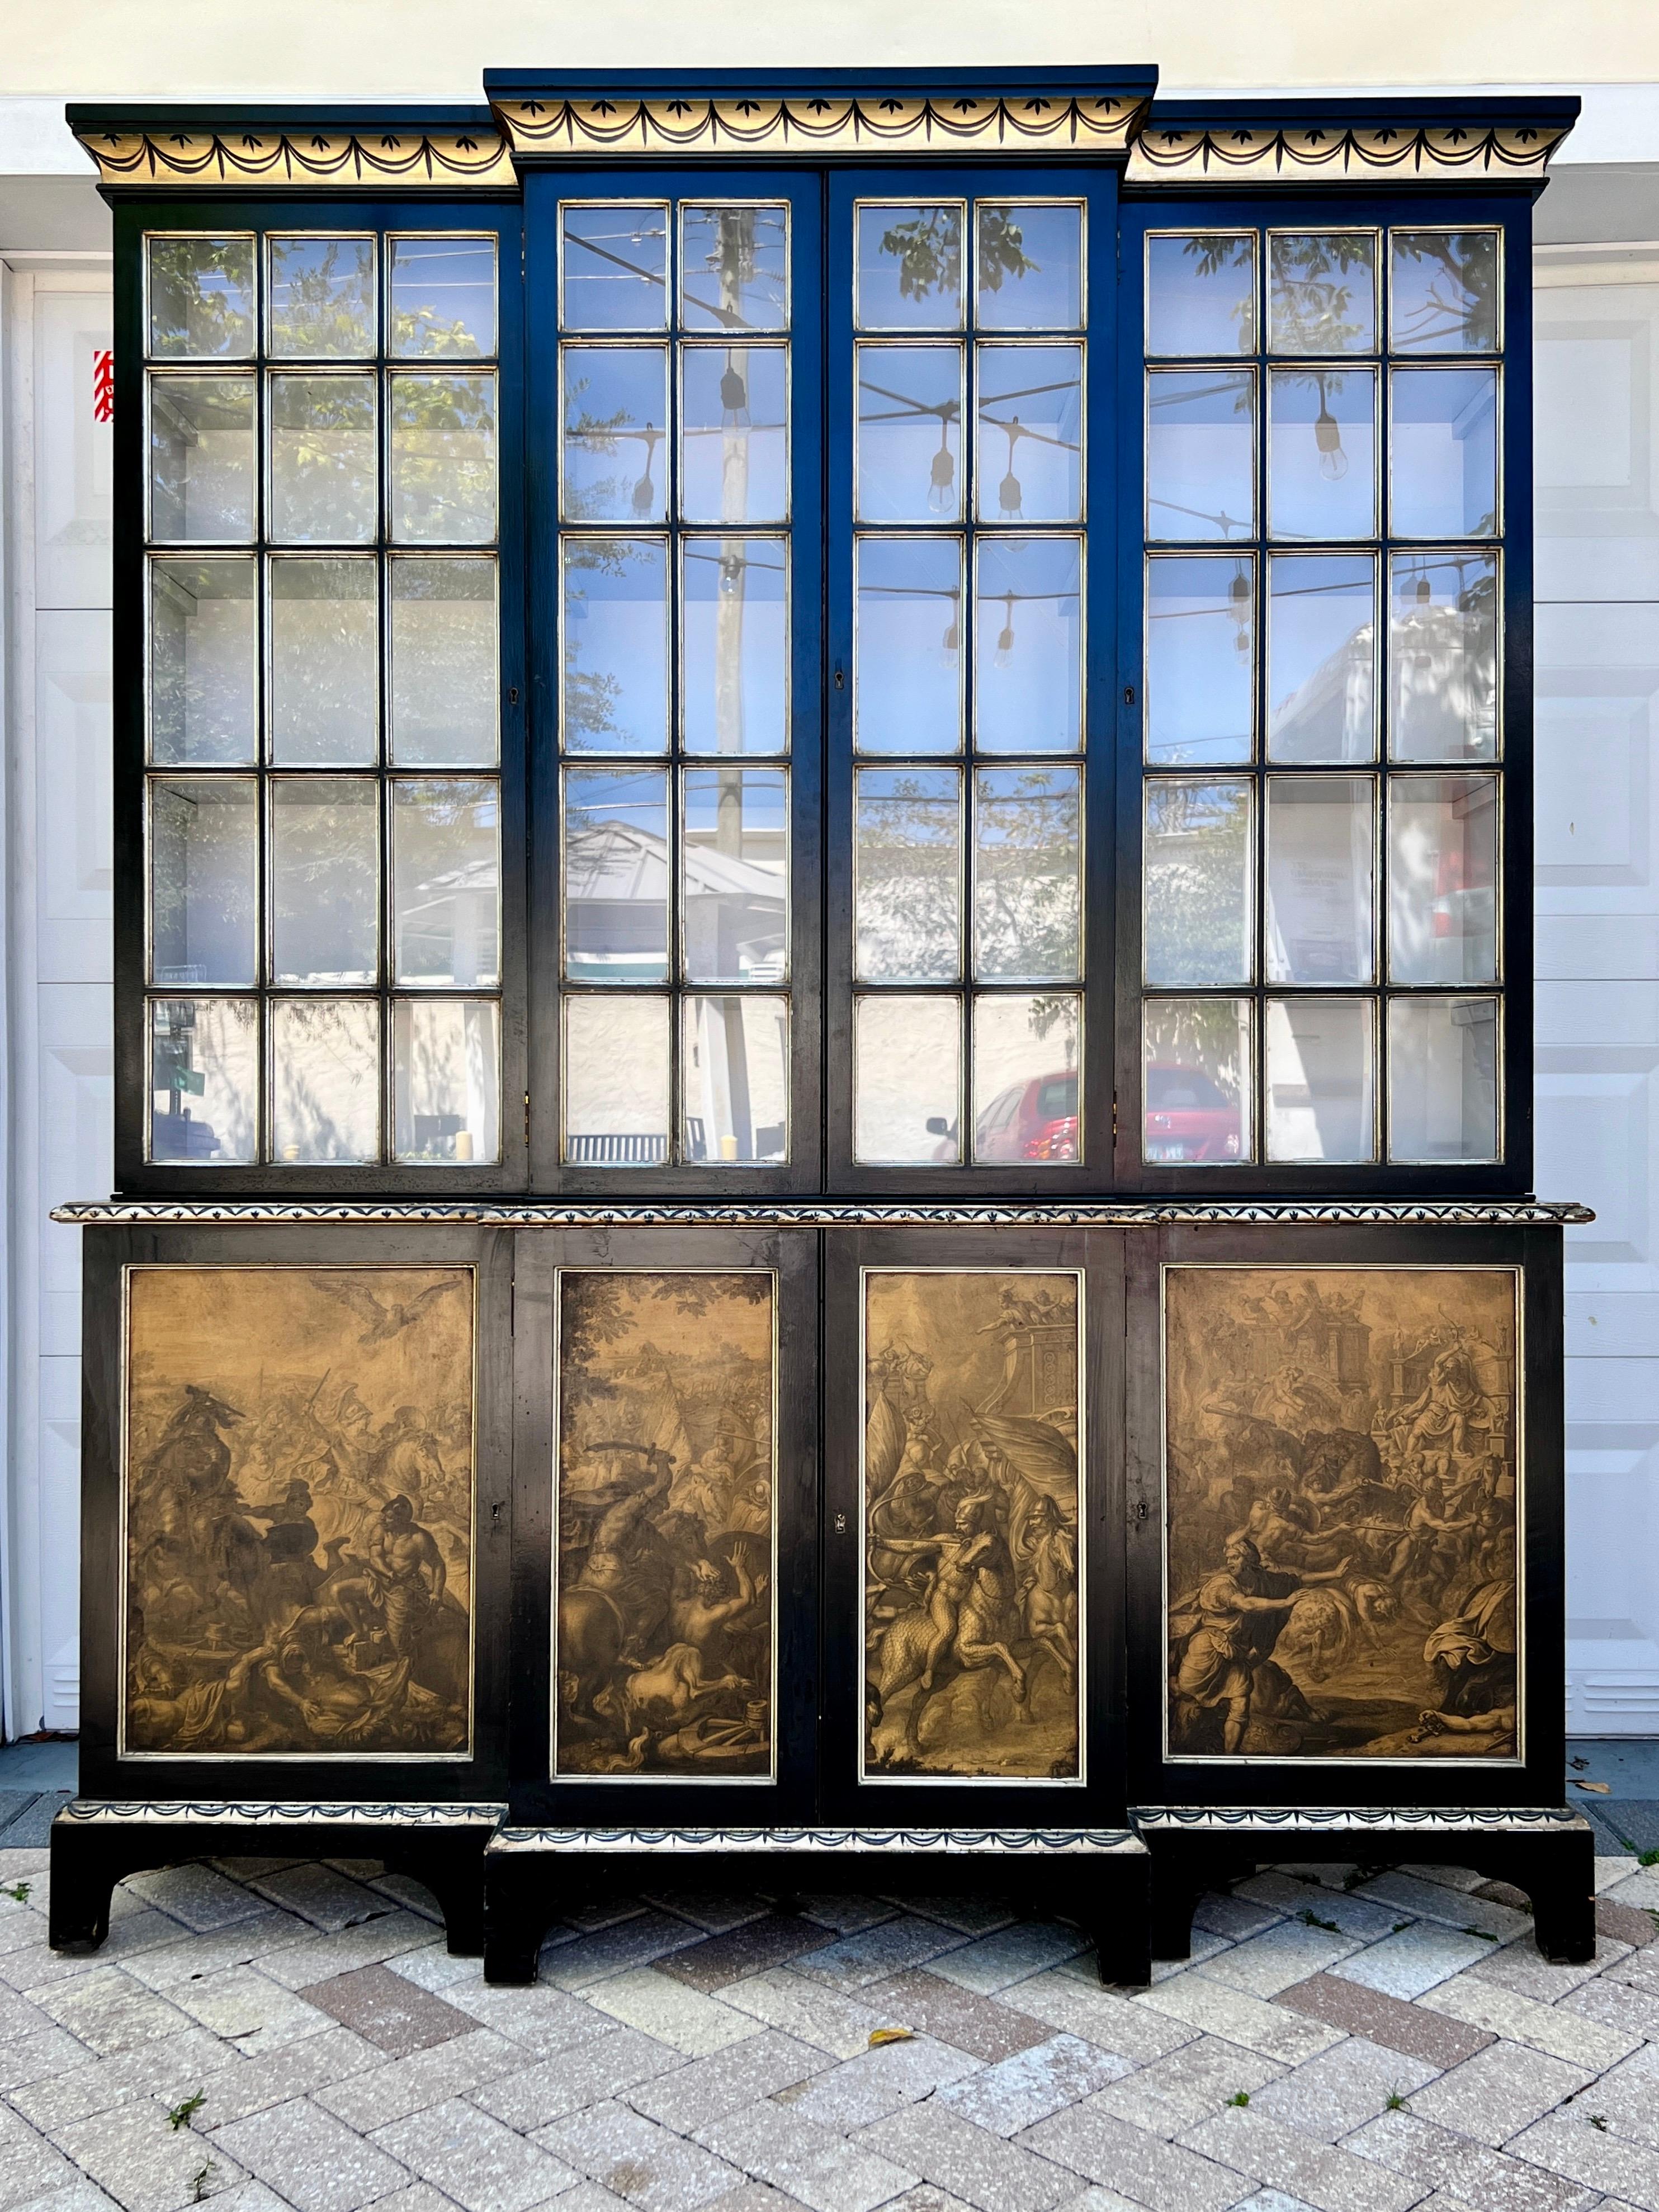 Bibliotheque display cabinet hand painted in black with Neoclassical motifs in silver and gold leaf. The breakfront is fitted with glass pane cabinet doors with antique silver leaf trim. The doors open to five rows of interior shelves painted in